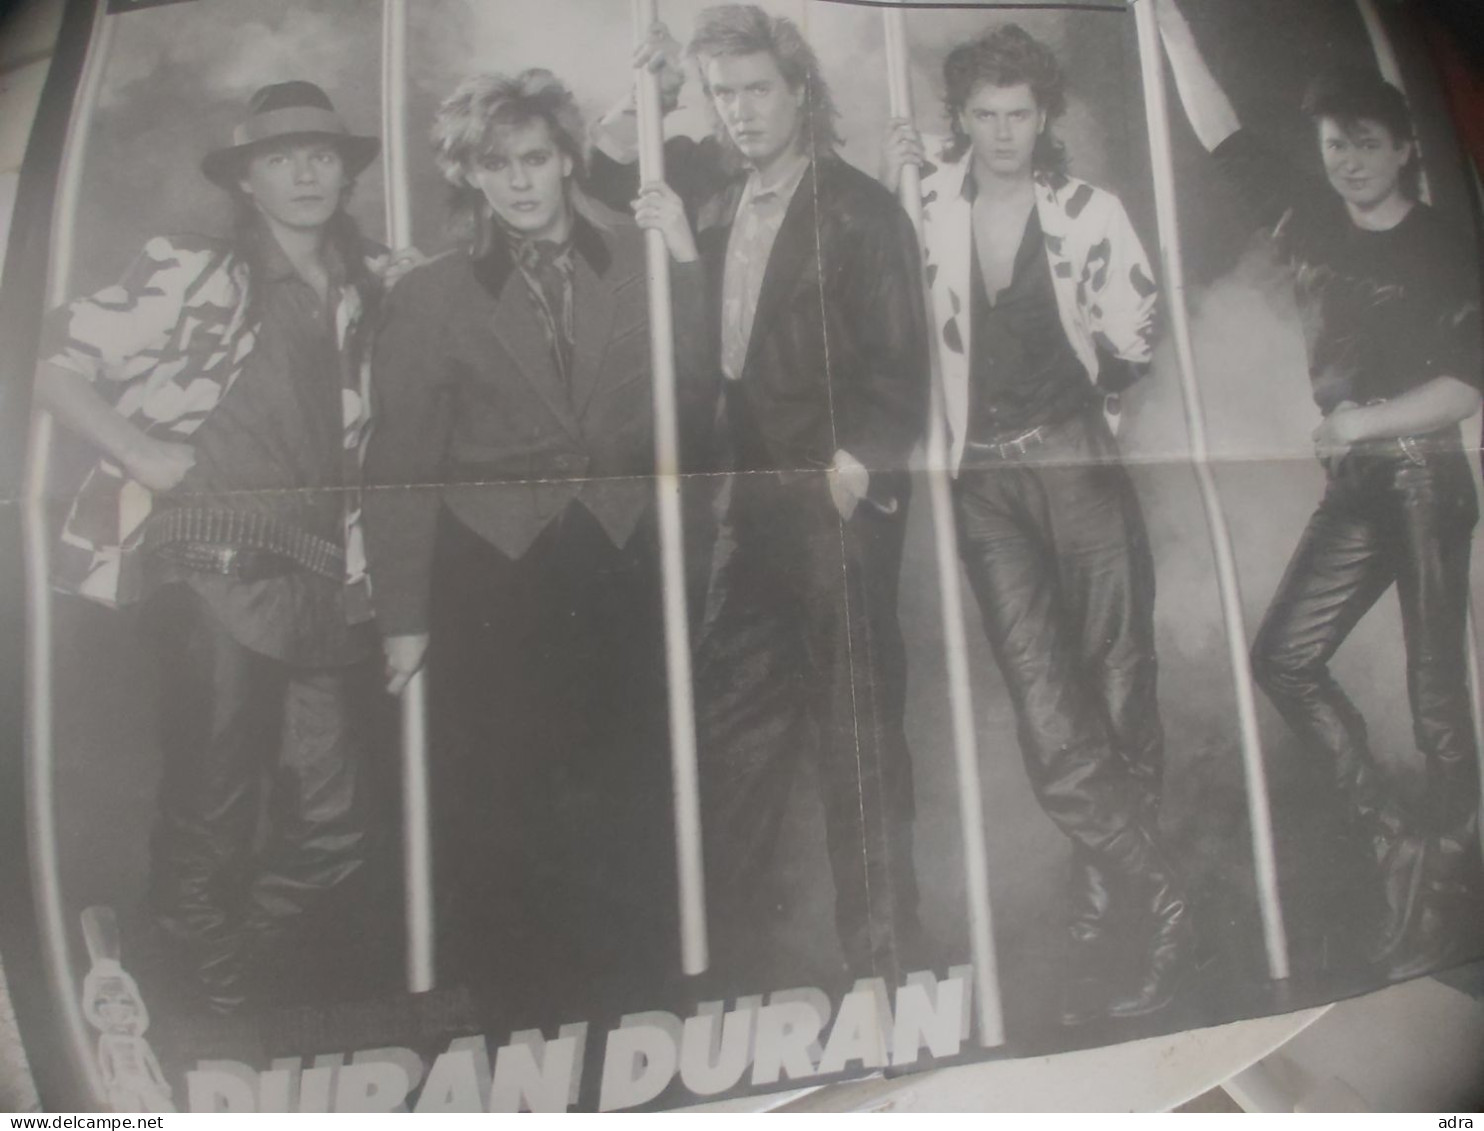 DURAN DURAN TWO SIDES POSTER 58 X 40 Cm RARITY - Posters